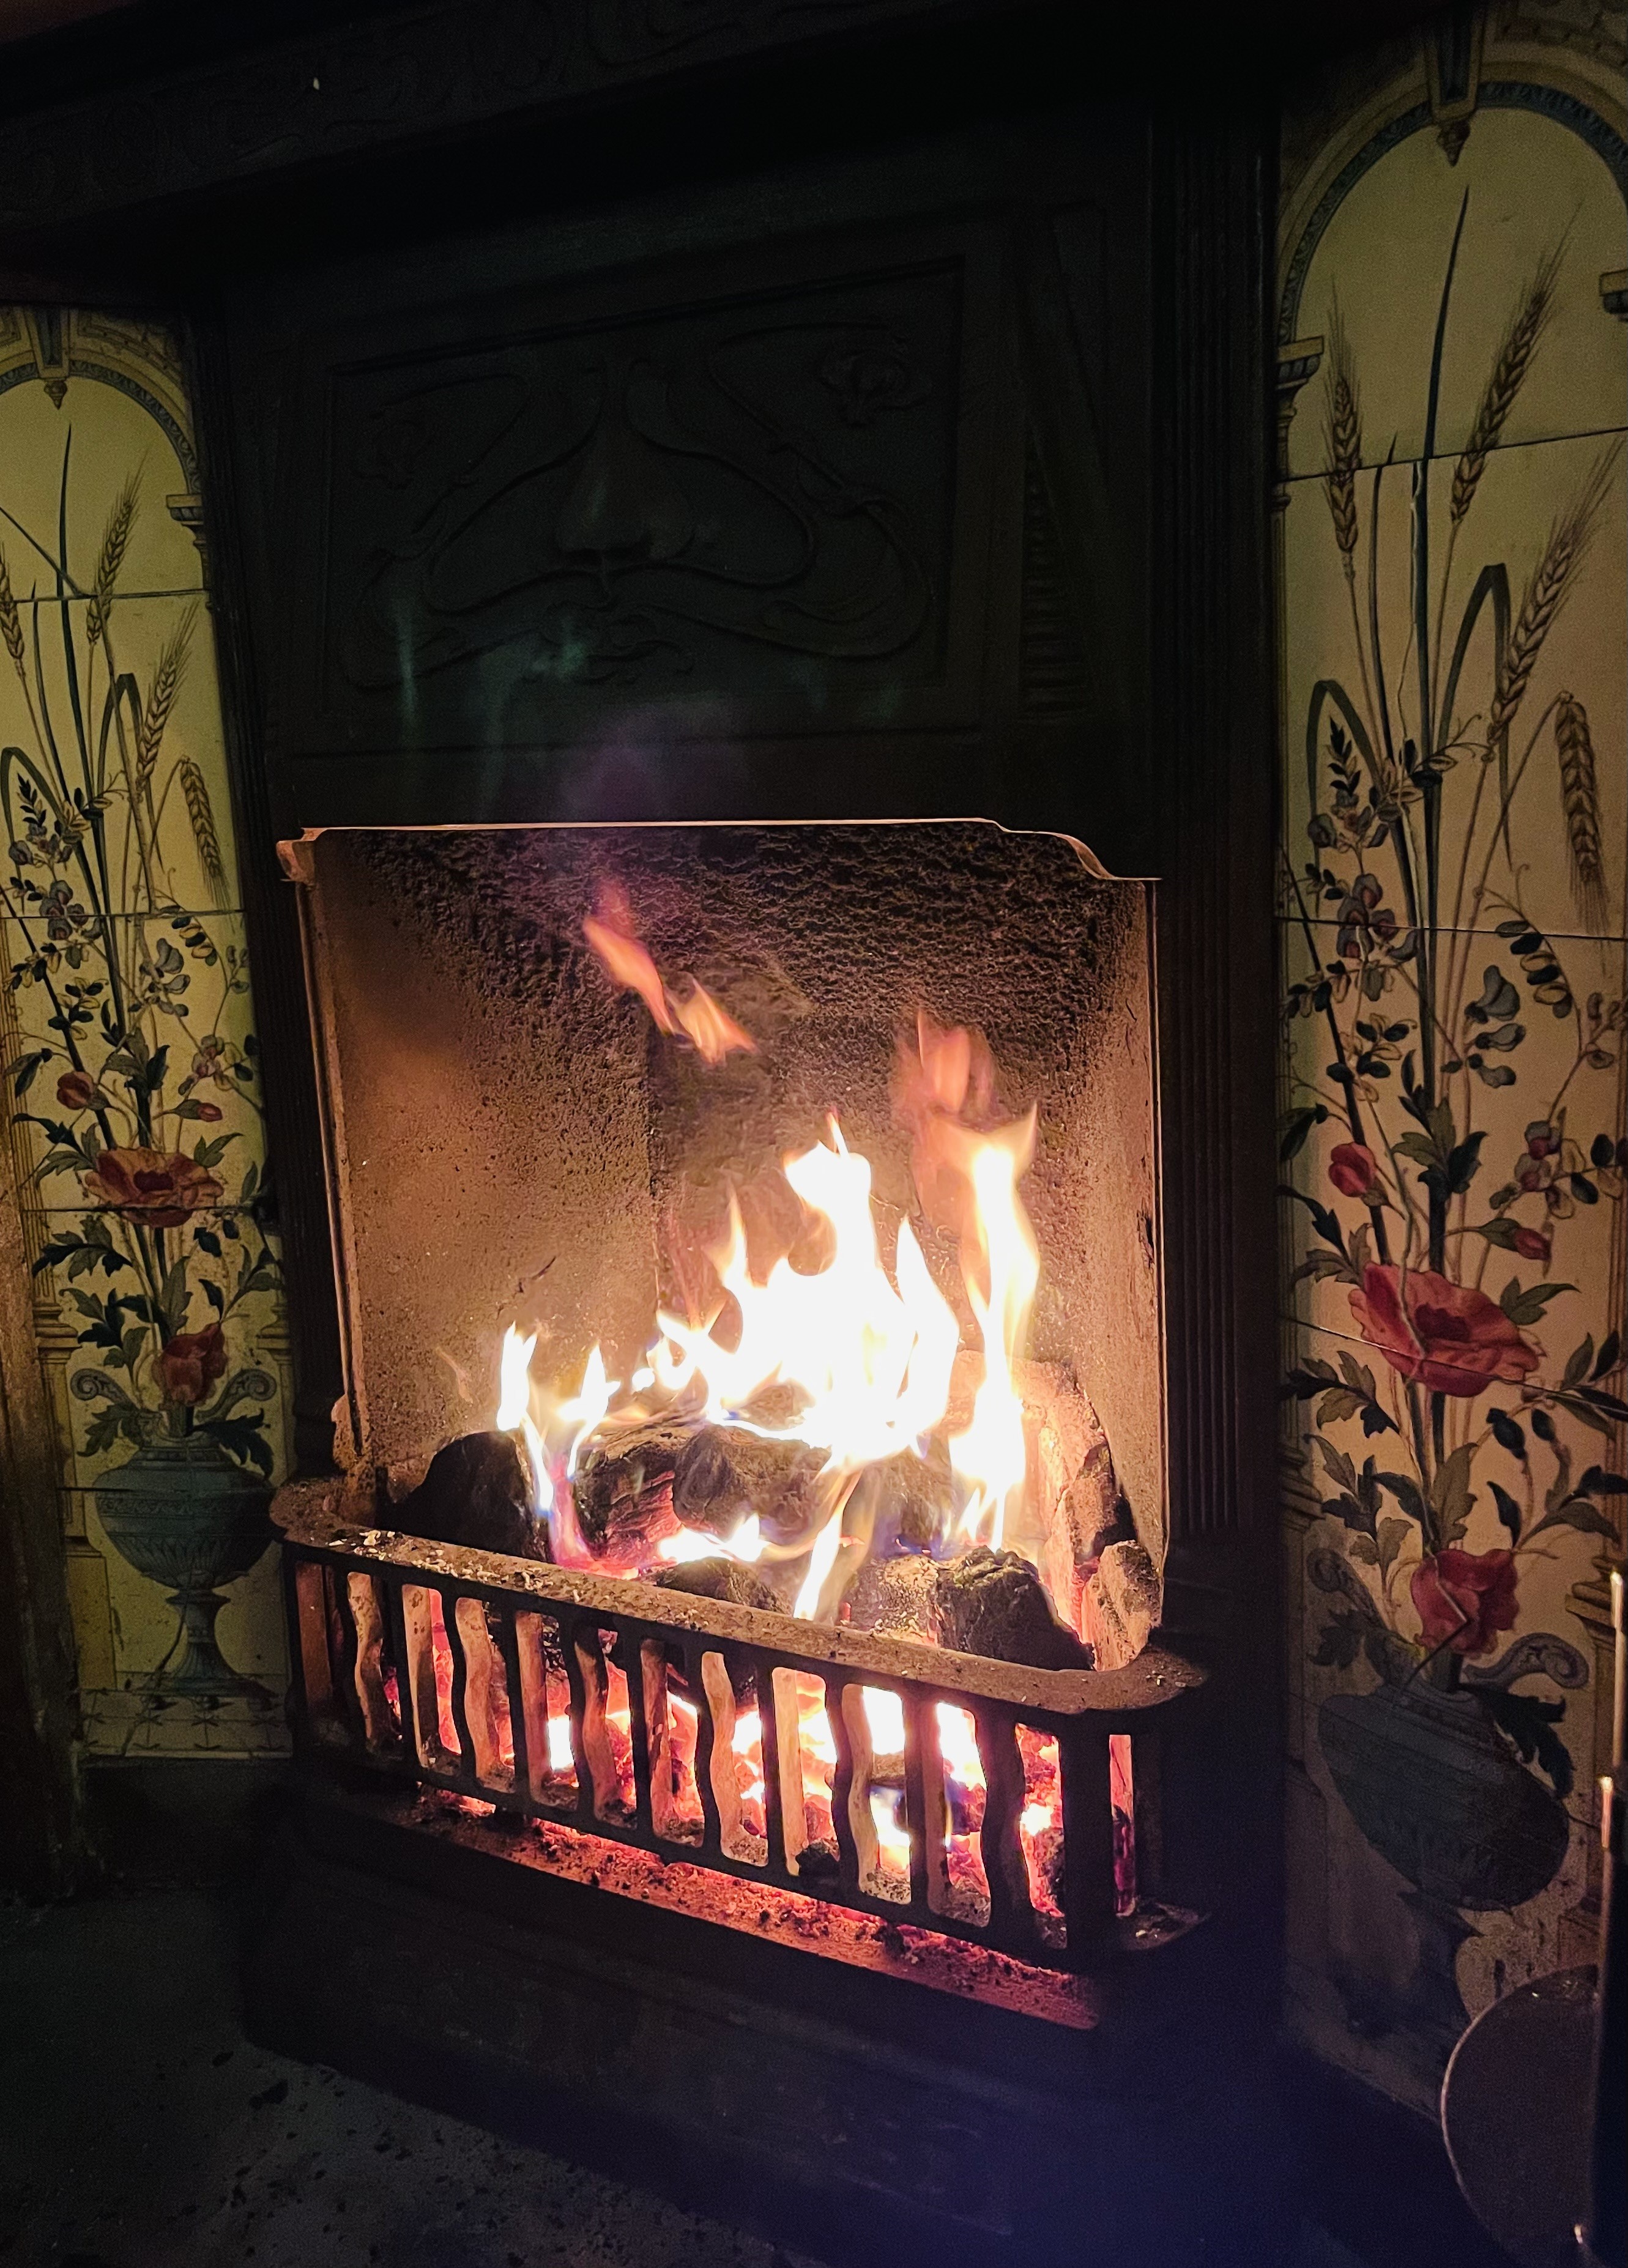 The Lounge's open fireplace